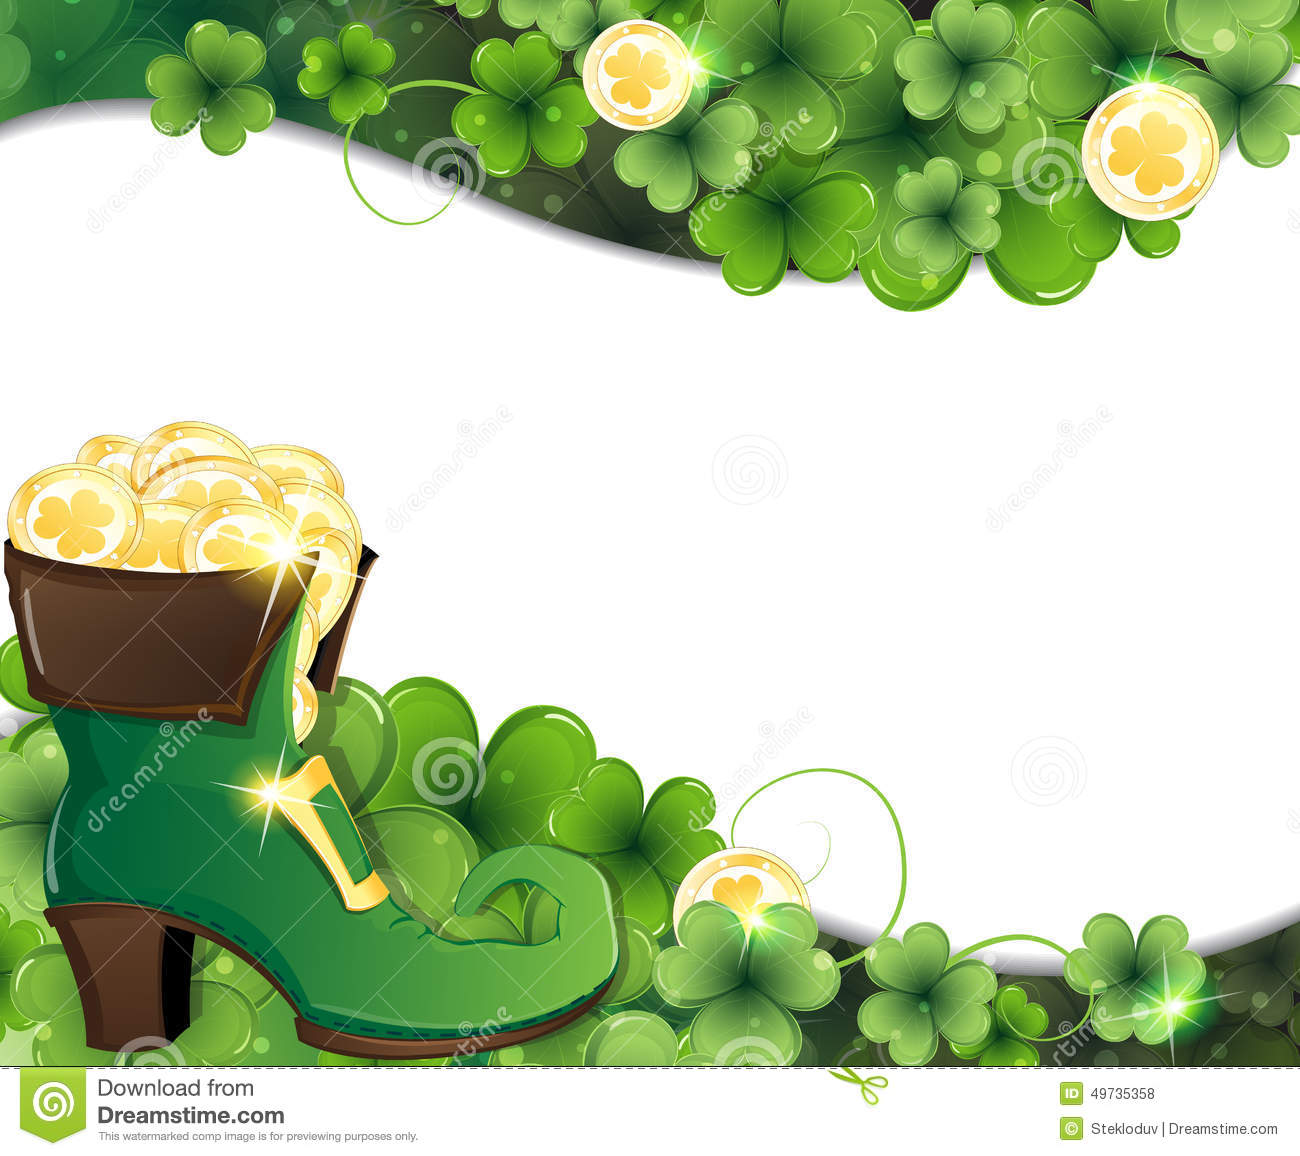 Leprechaun Shoe On Clover And Gold Coins  St  Patrick S Day Background